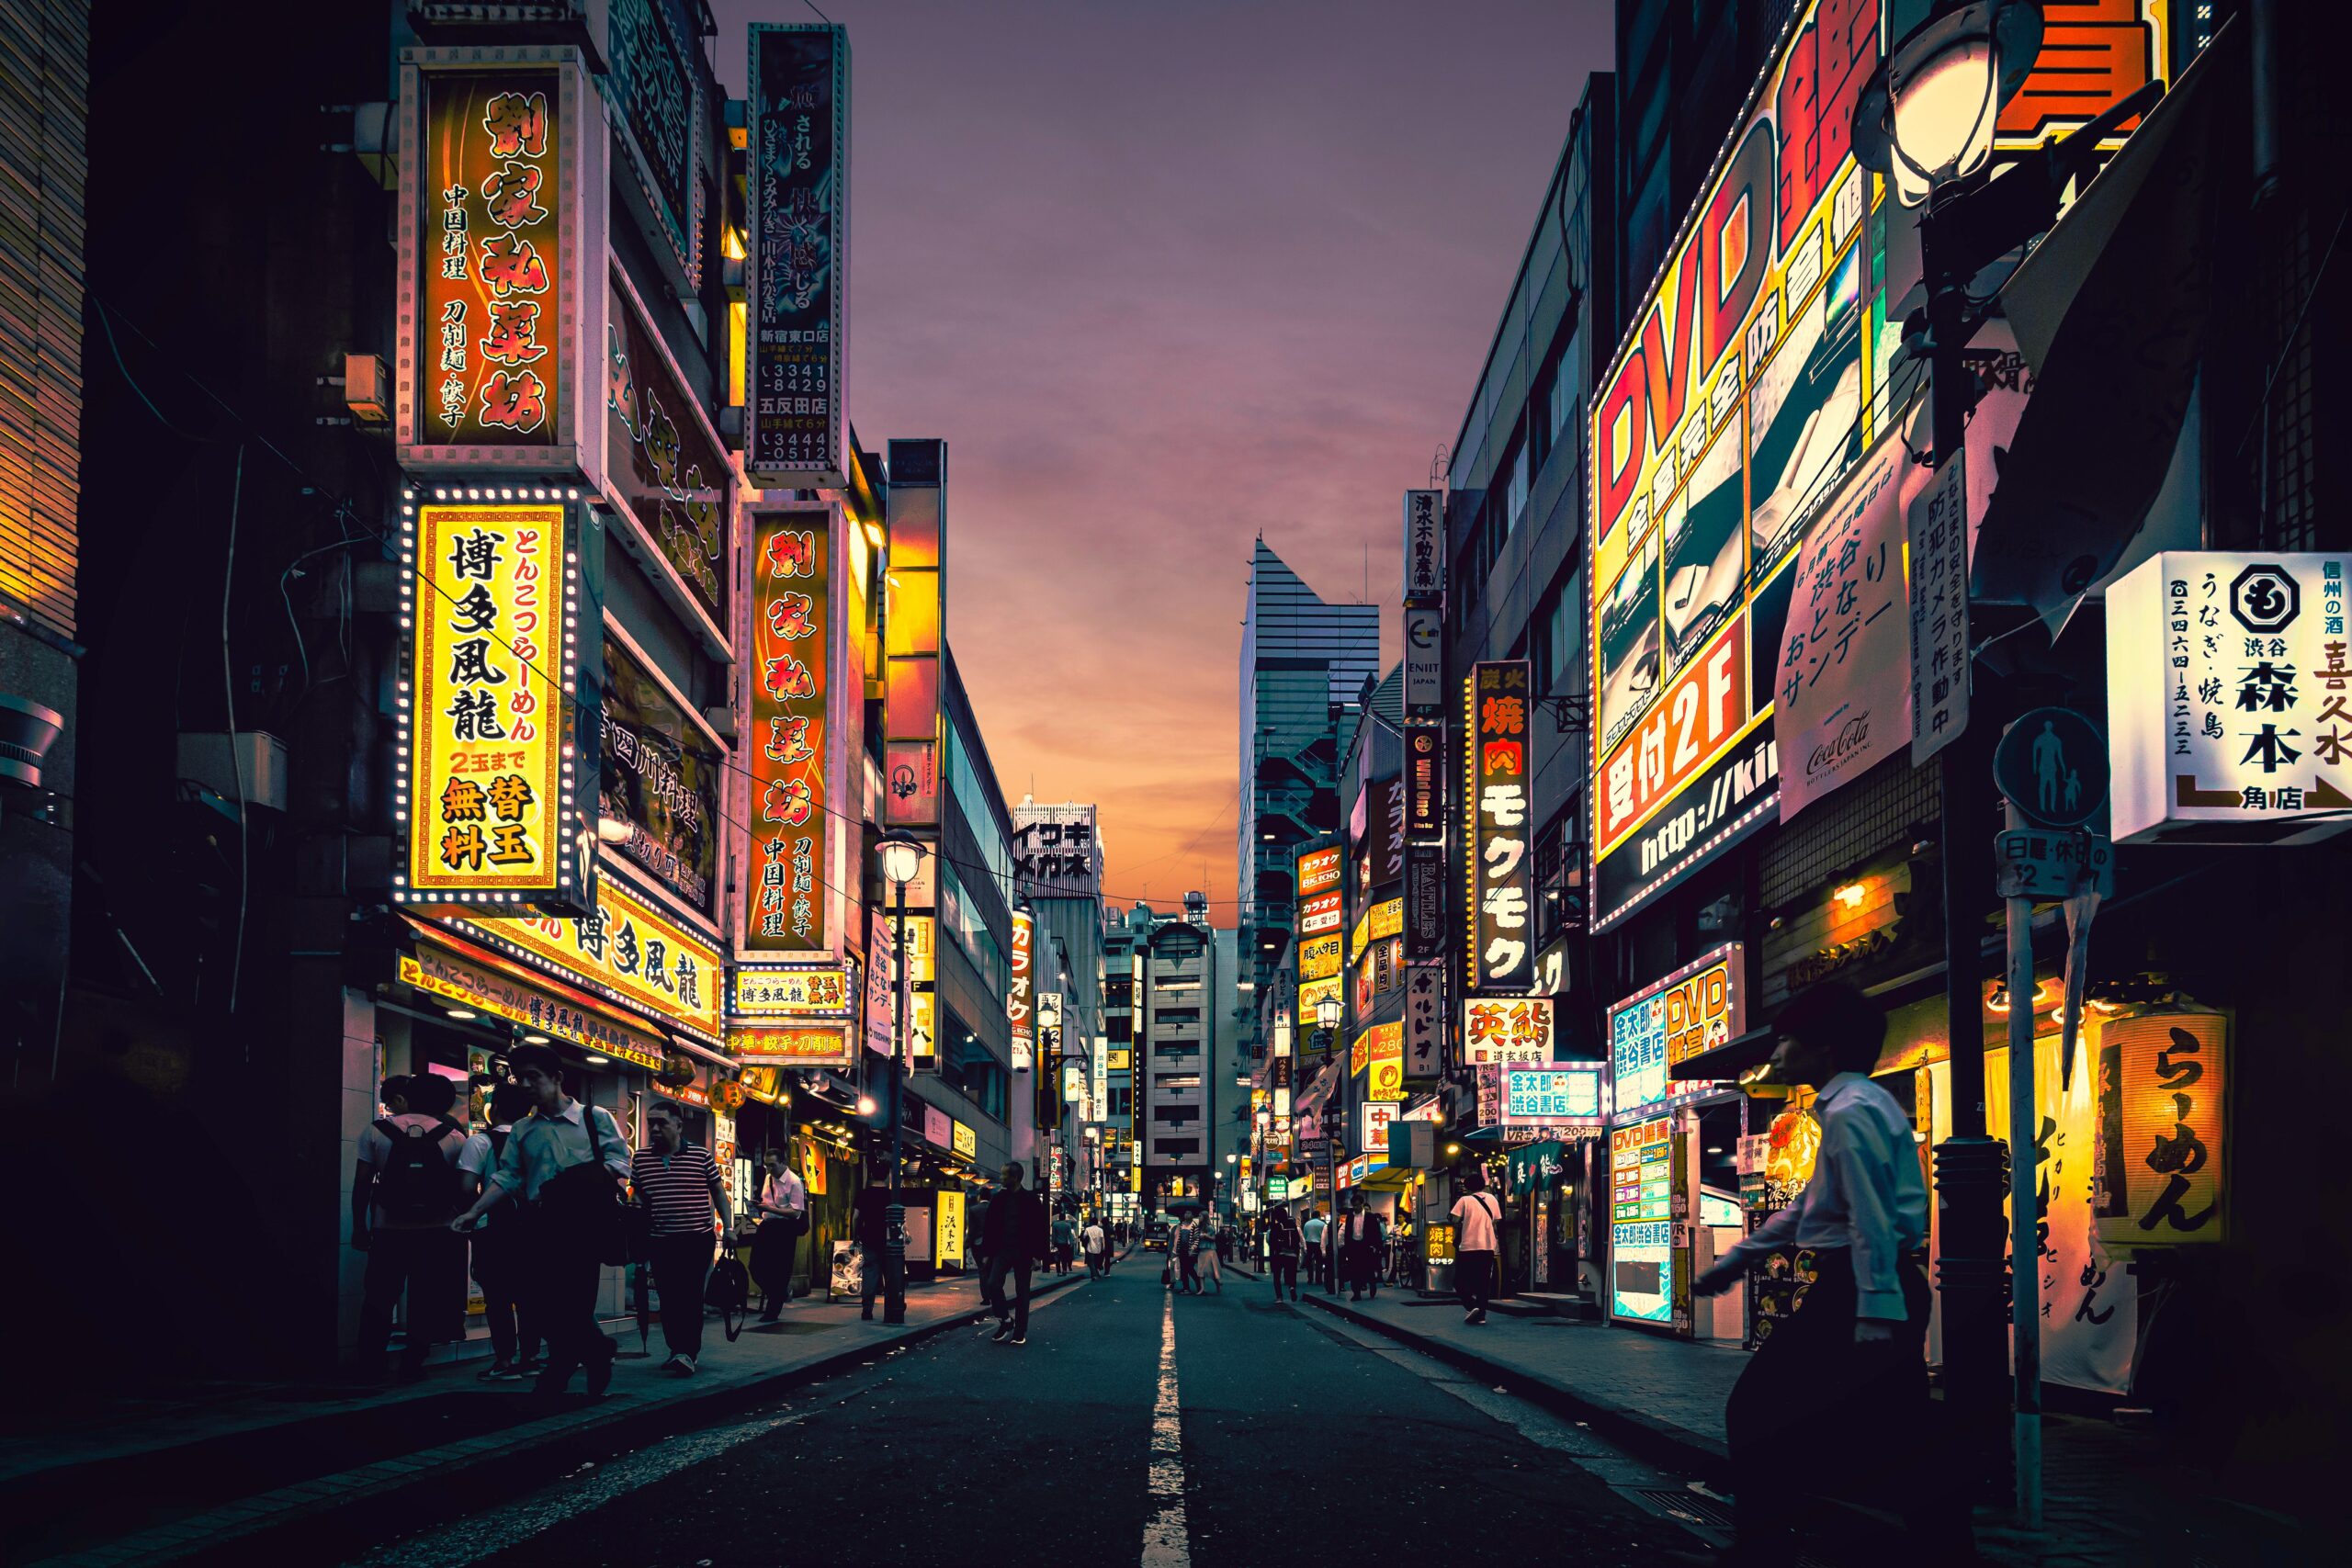 A night view of Japan